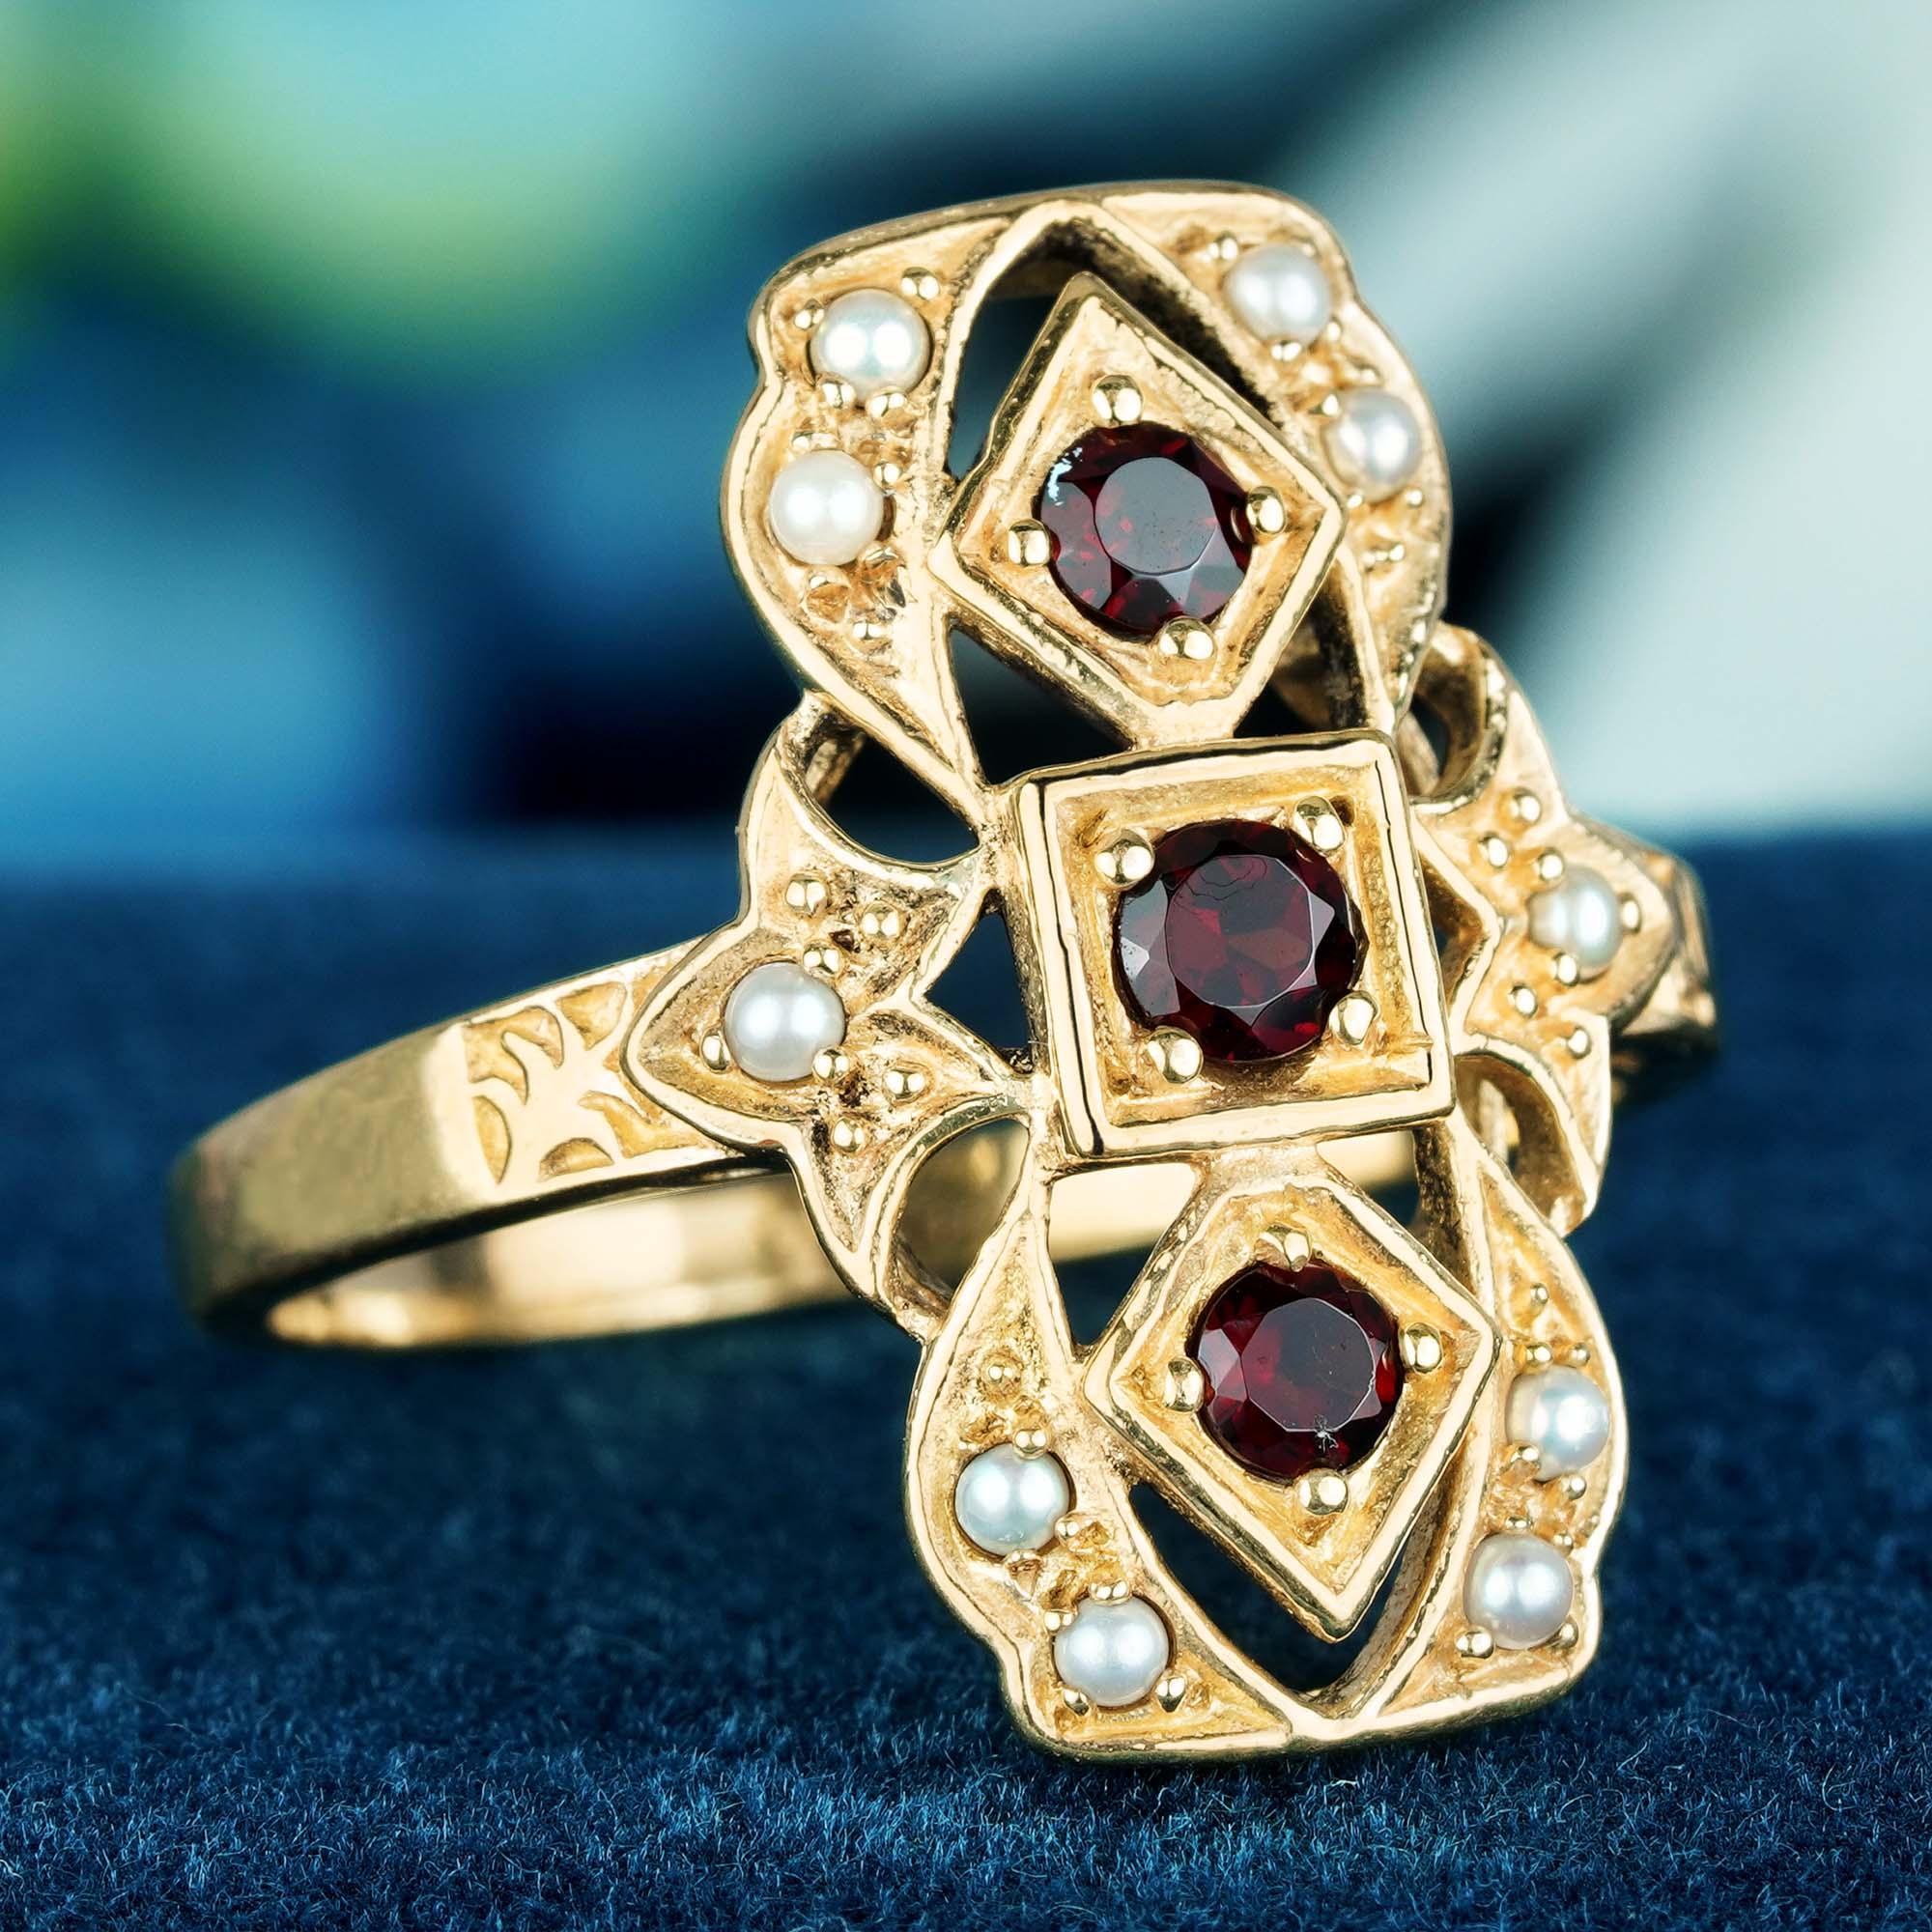 Add a delicate and unique aesthetic to your hand with this ring by GEMMA FILIGREE. Our antique design gold rings equate to delicacy and light openwork, while maintains strength for everyday wear for a lifetime.

Three stone ring is popular ring